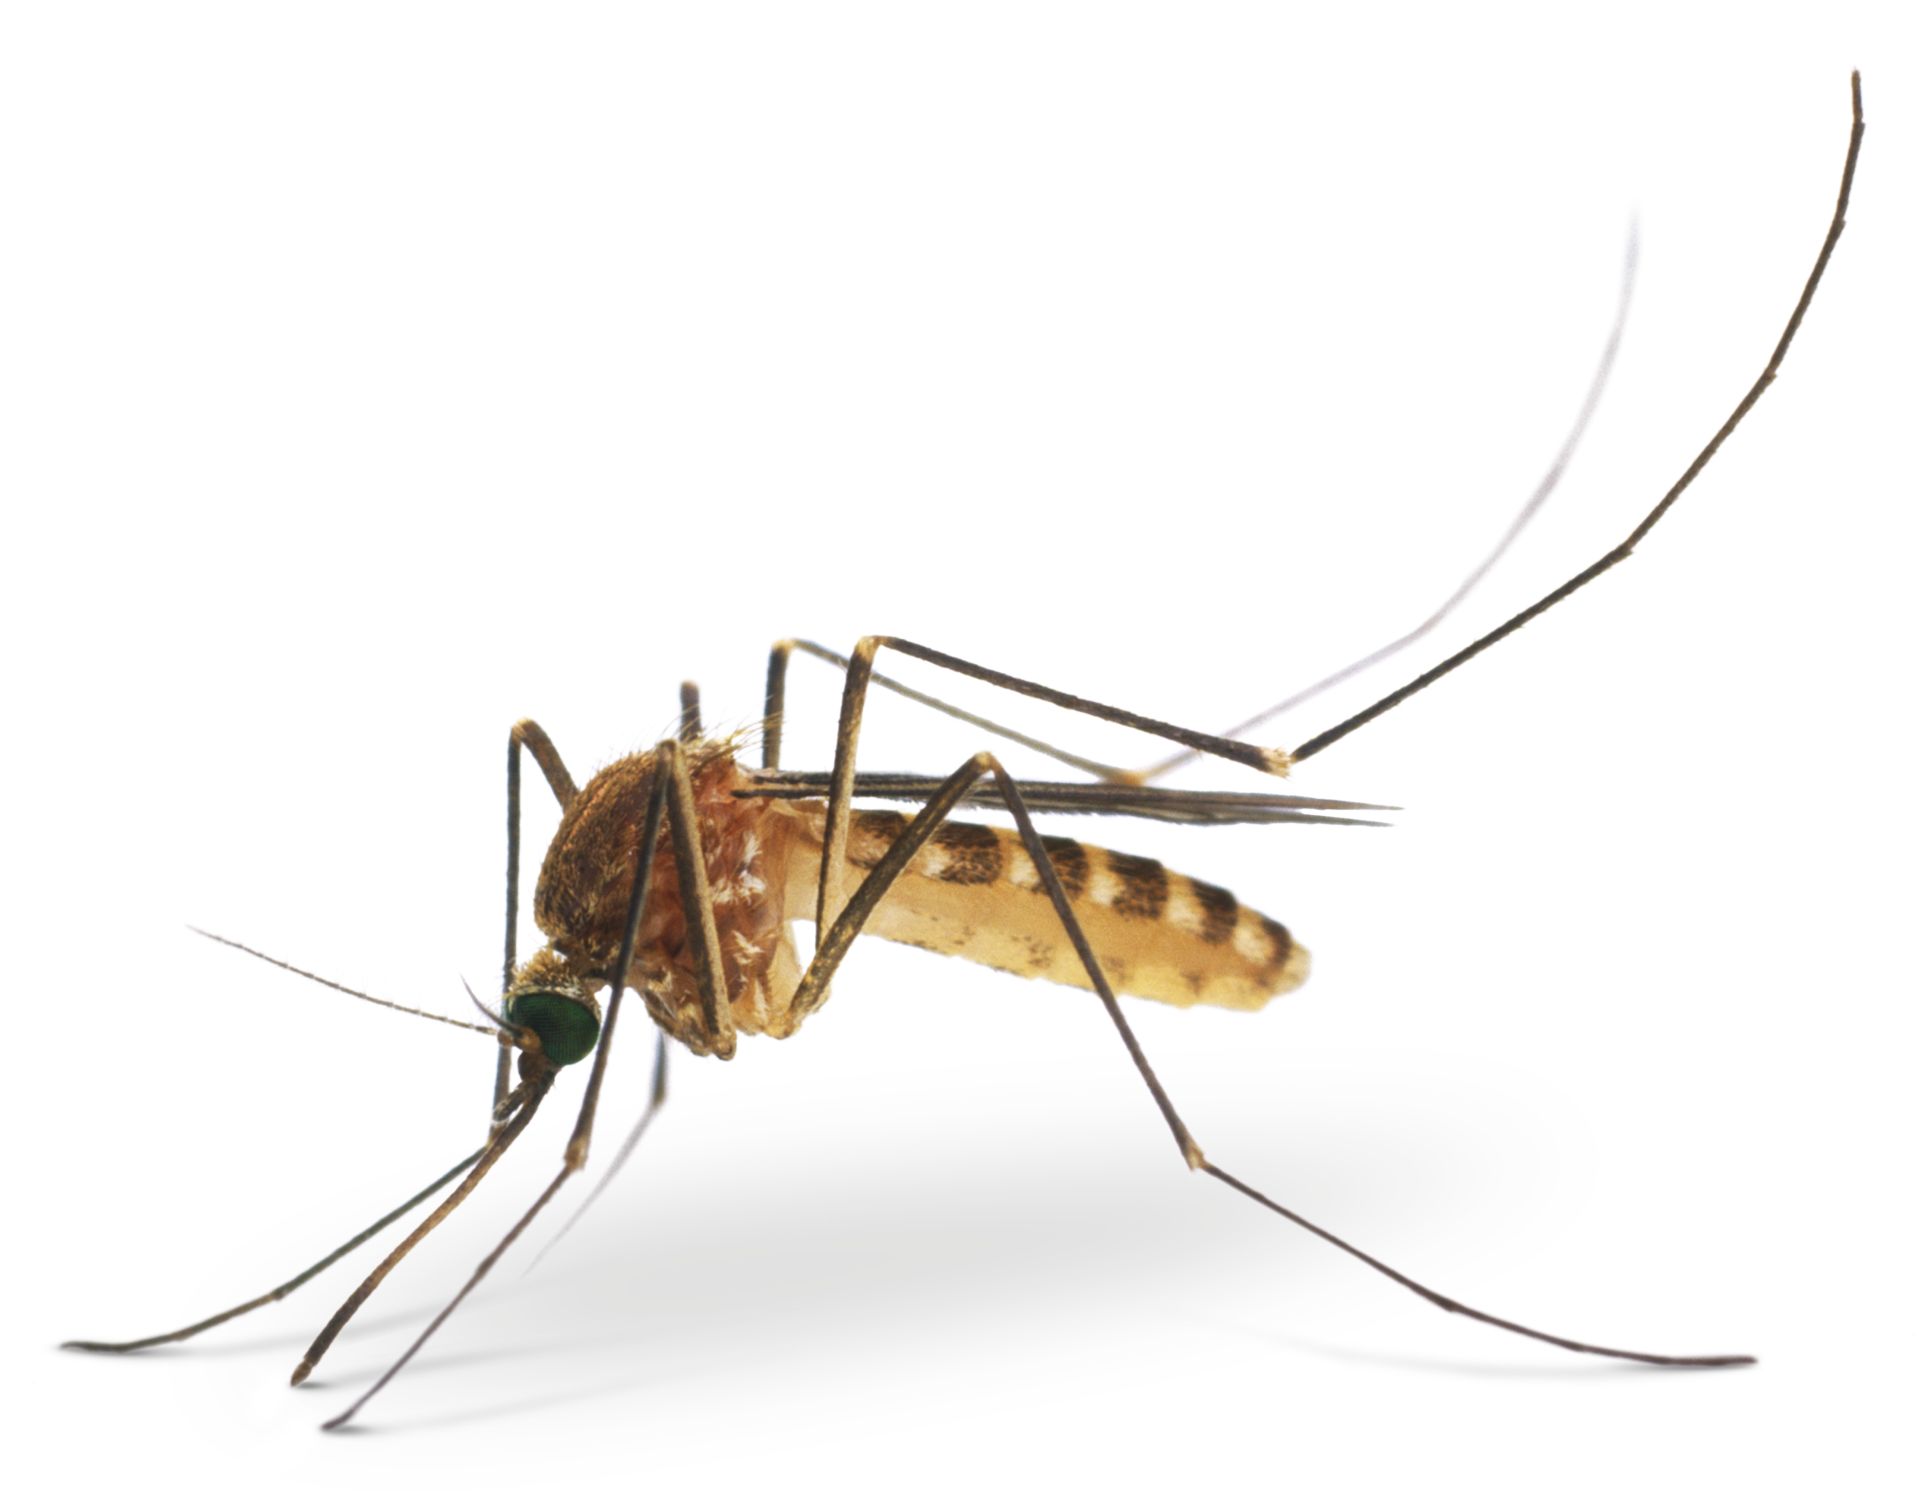 Mosquito Facts | Are Mosquitoes Dangerous | DK Find Out